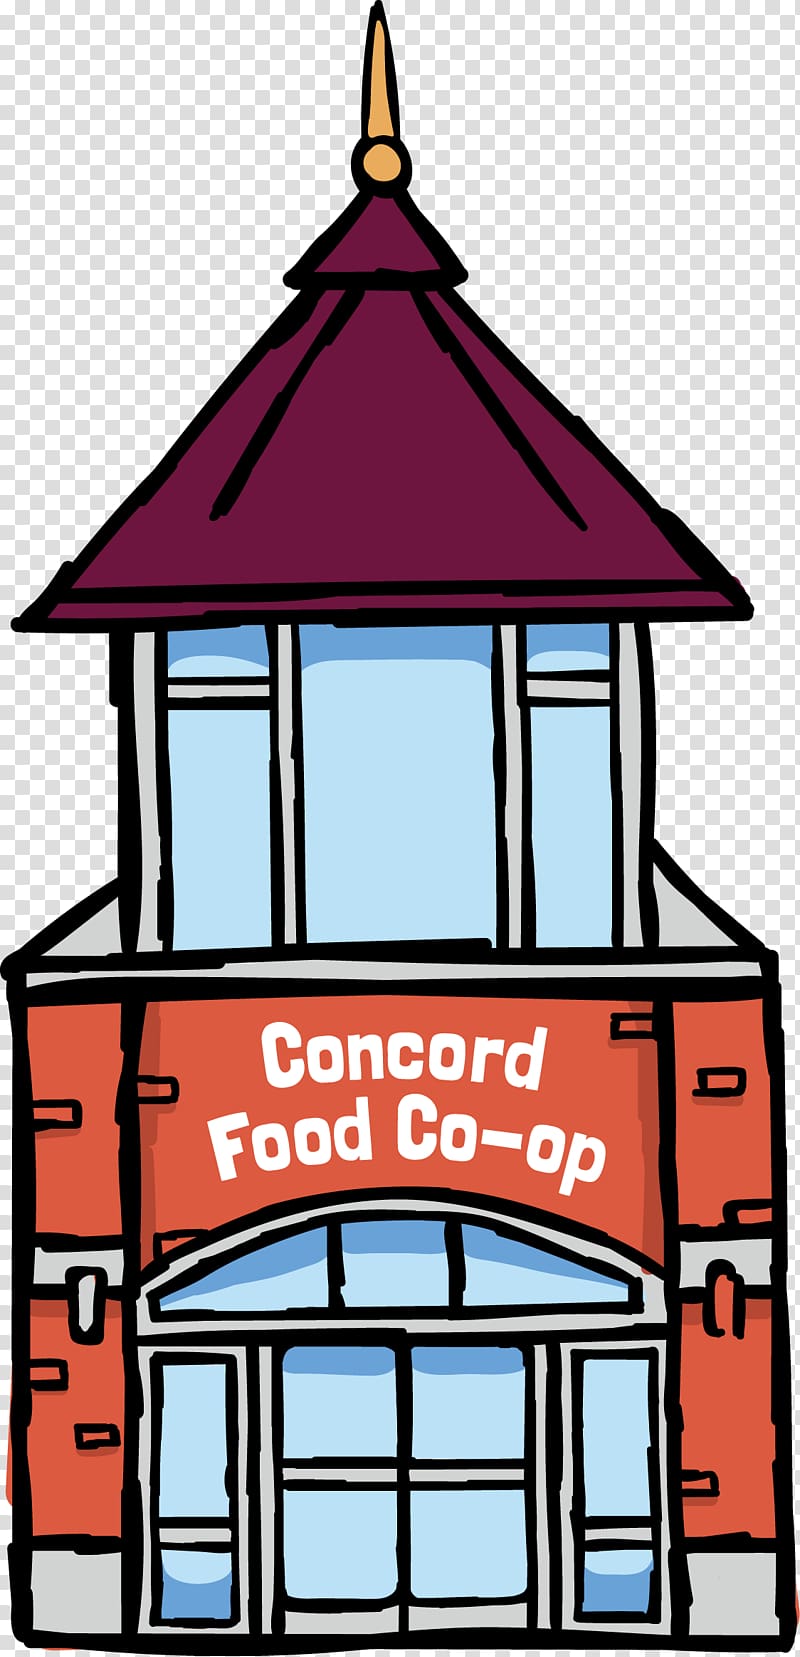 Concord Food Co-op Cafe Bakery Food cooperative, Concord Day transparent background PNG clipart